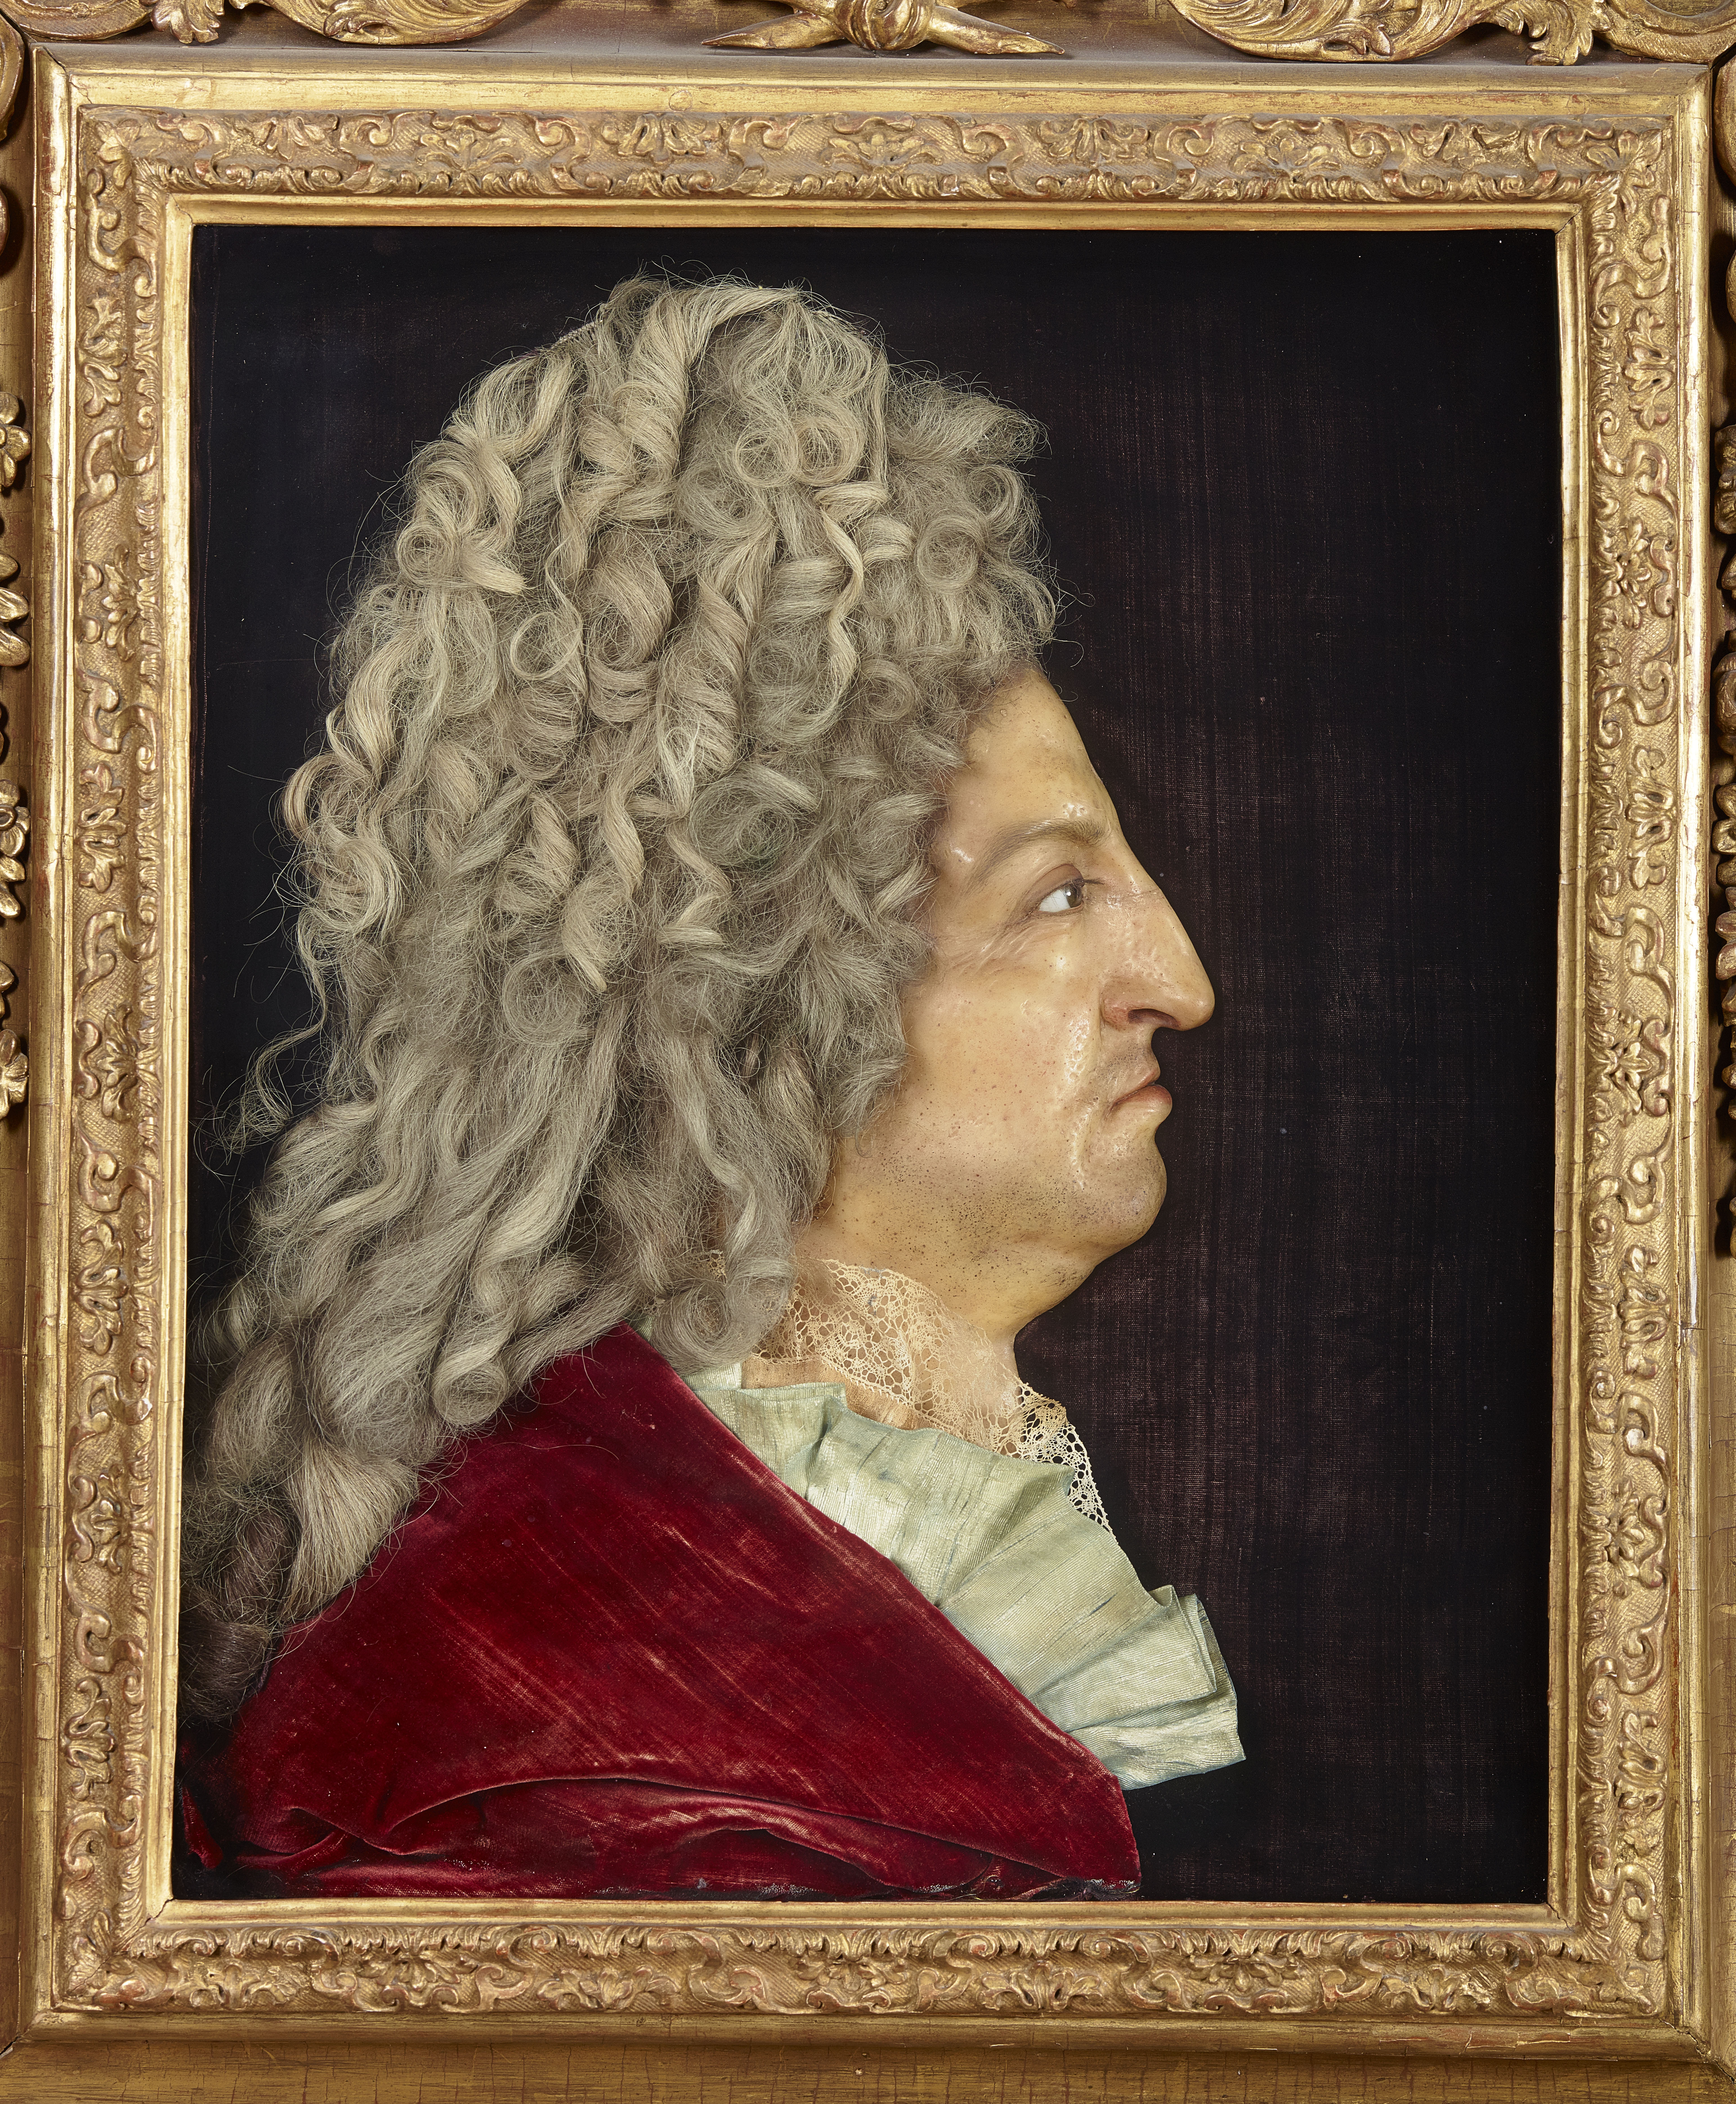 The Buzz on Antiques: What's the difference between Louis XIV